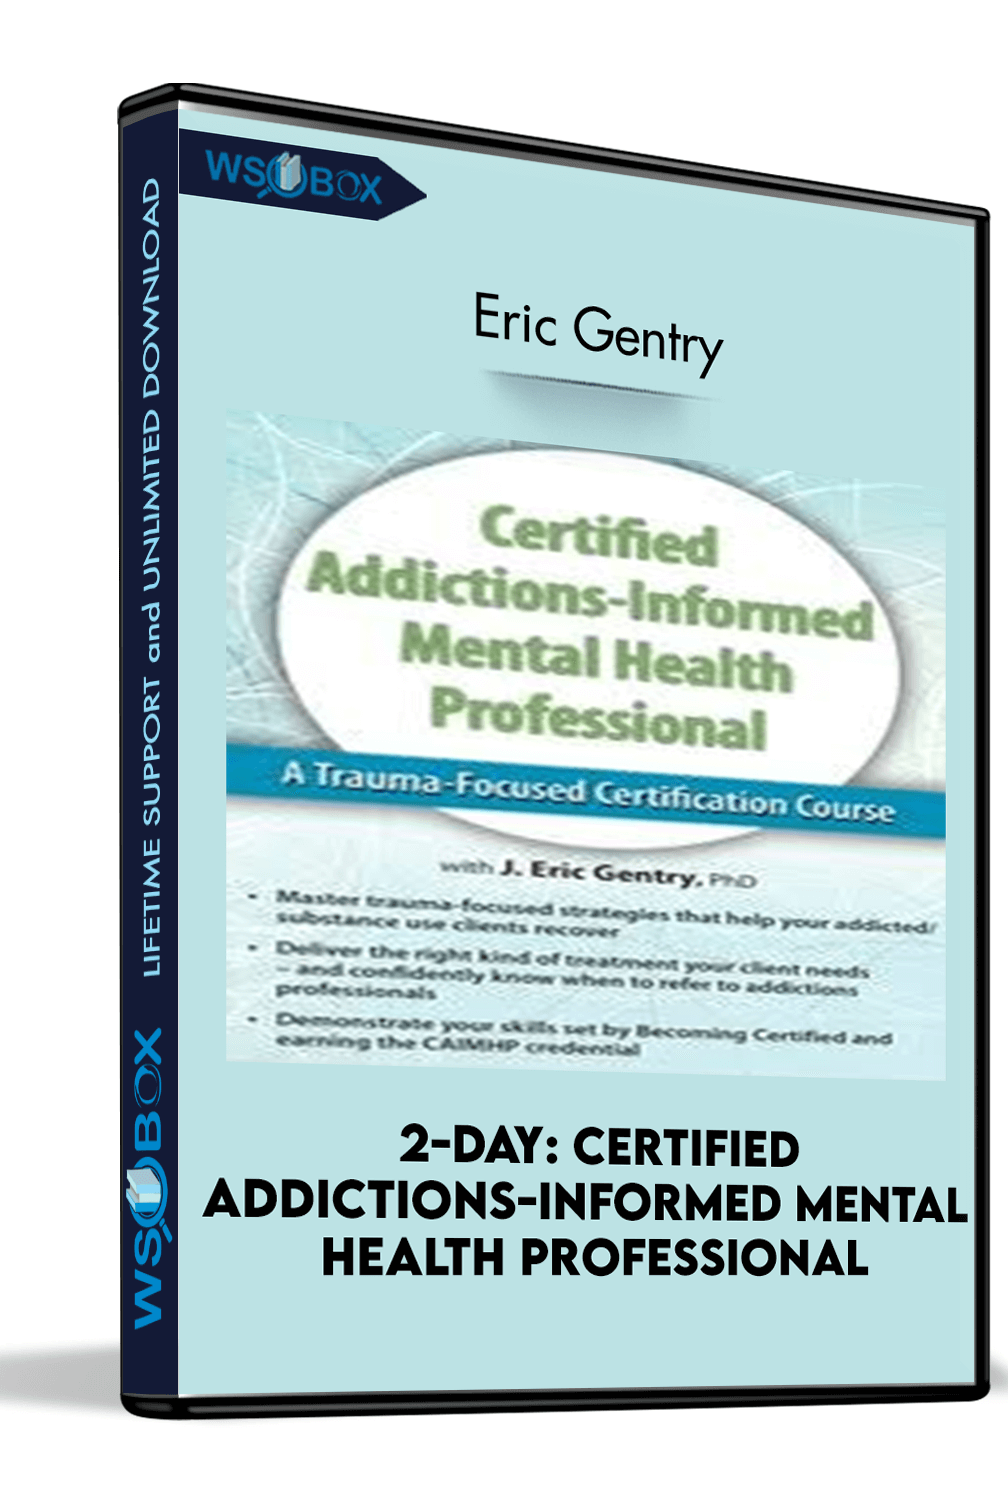 2-Day: Certified Addictions-Informed Mental Health Professional: A Trauma-Focused Certification Course – Eric Gentry